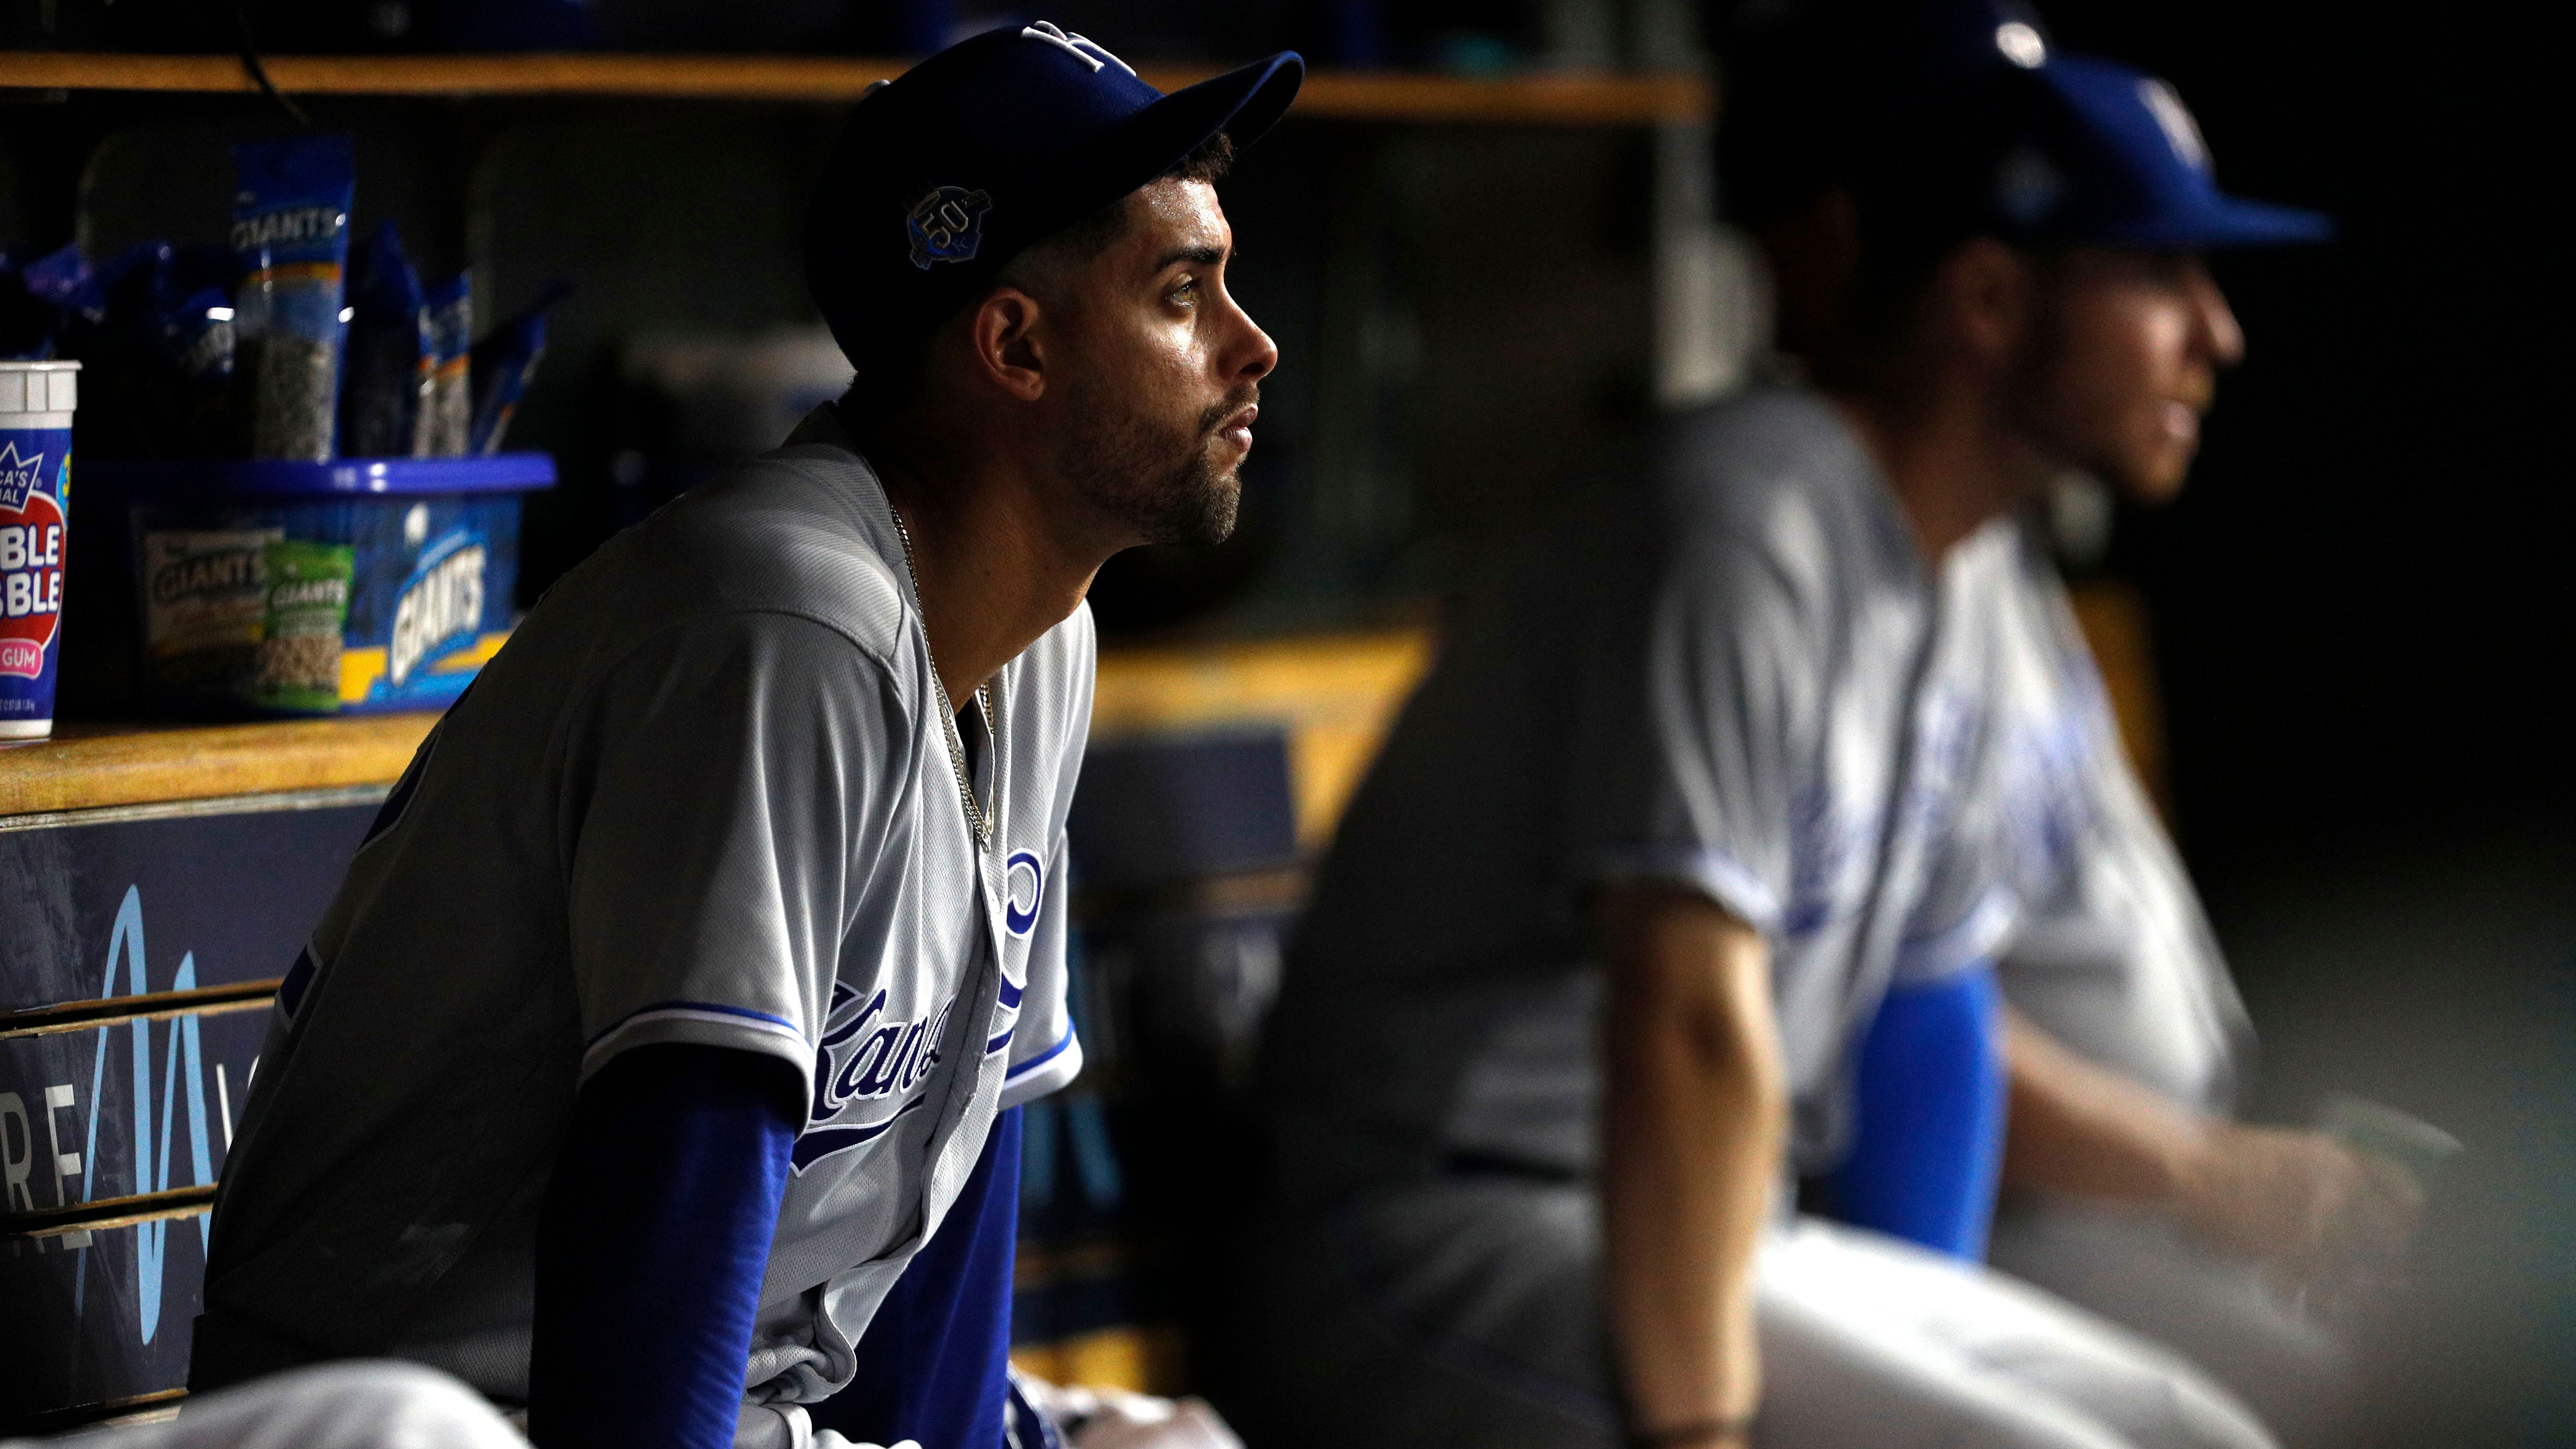 Losing streak continues as Royals outslugged 11-8